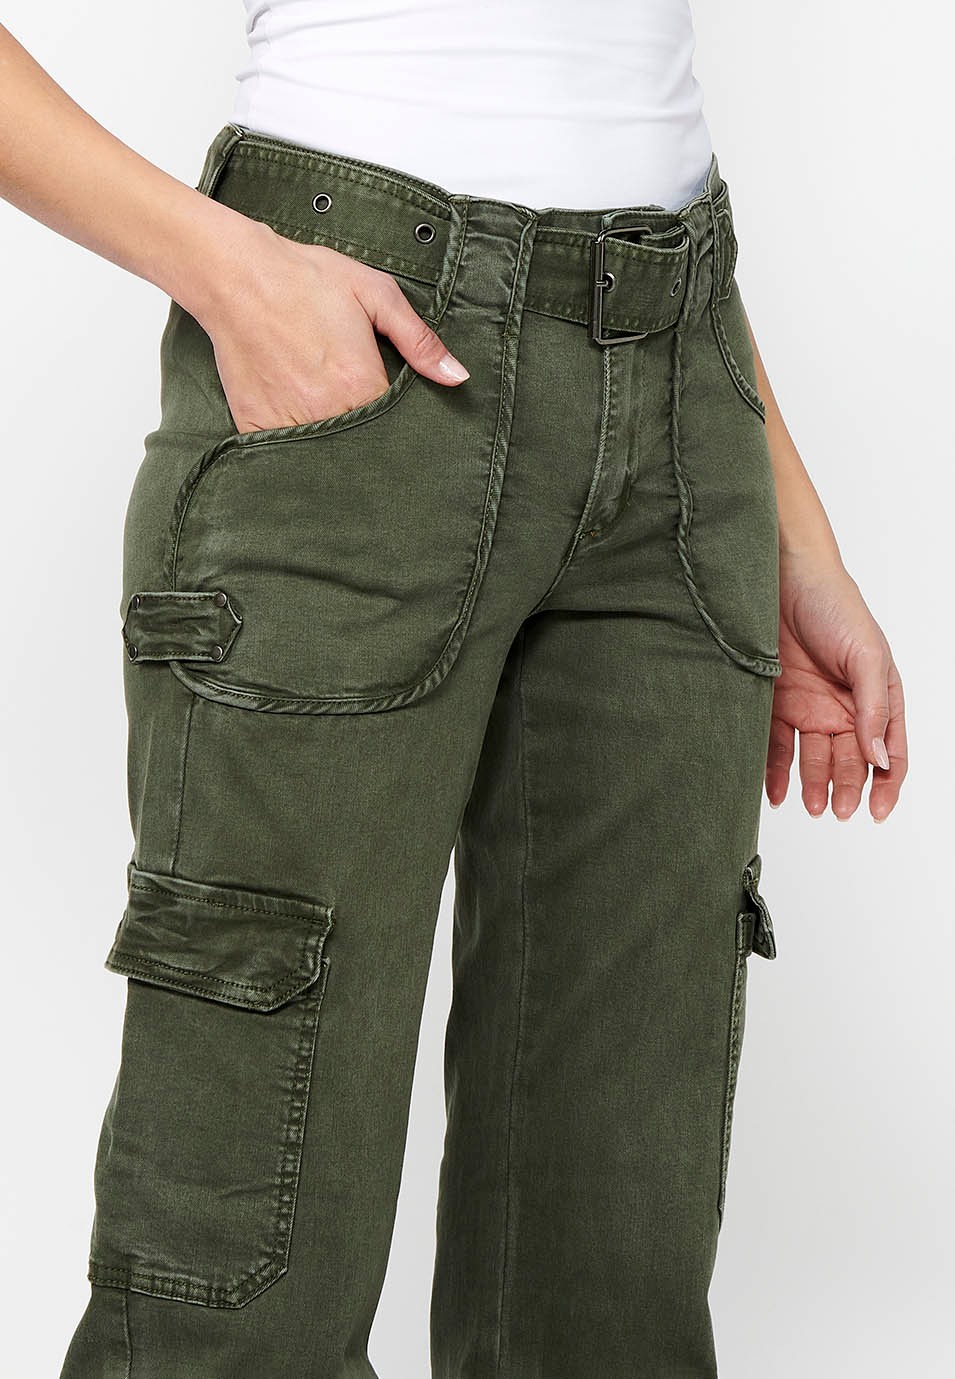 Long straight-cut pants with front zipper closure and button with patch pockets in Khaki Color for Women 9